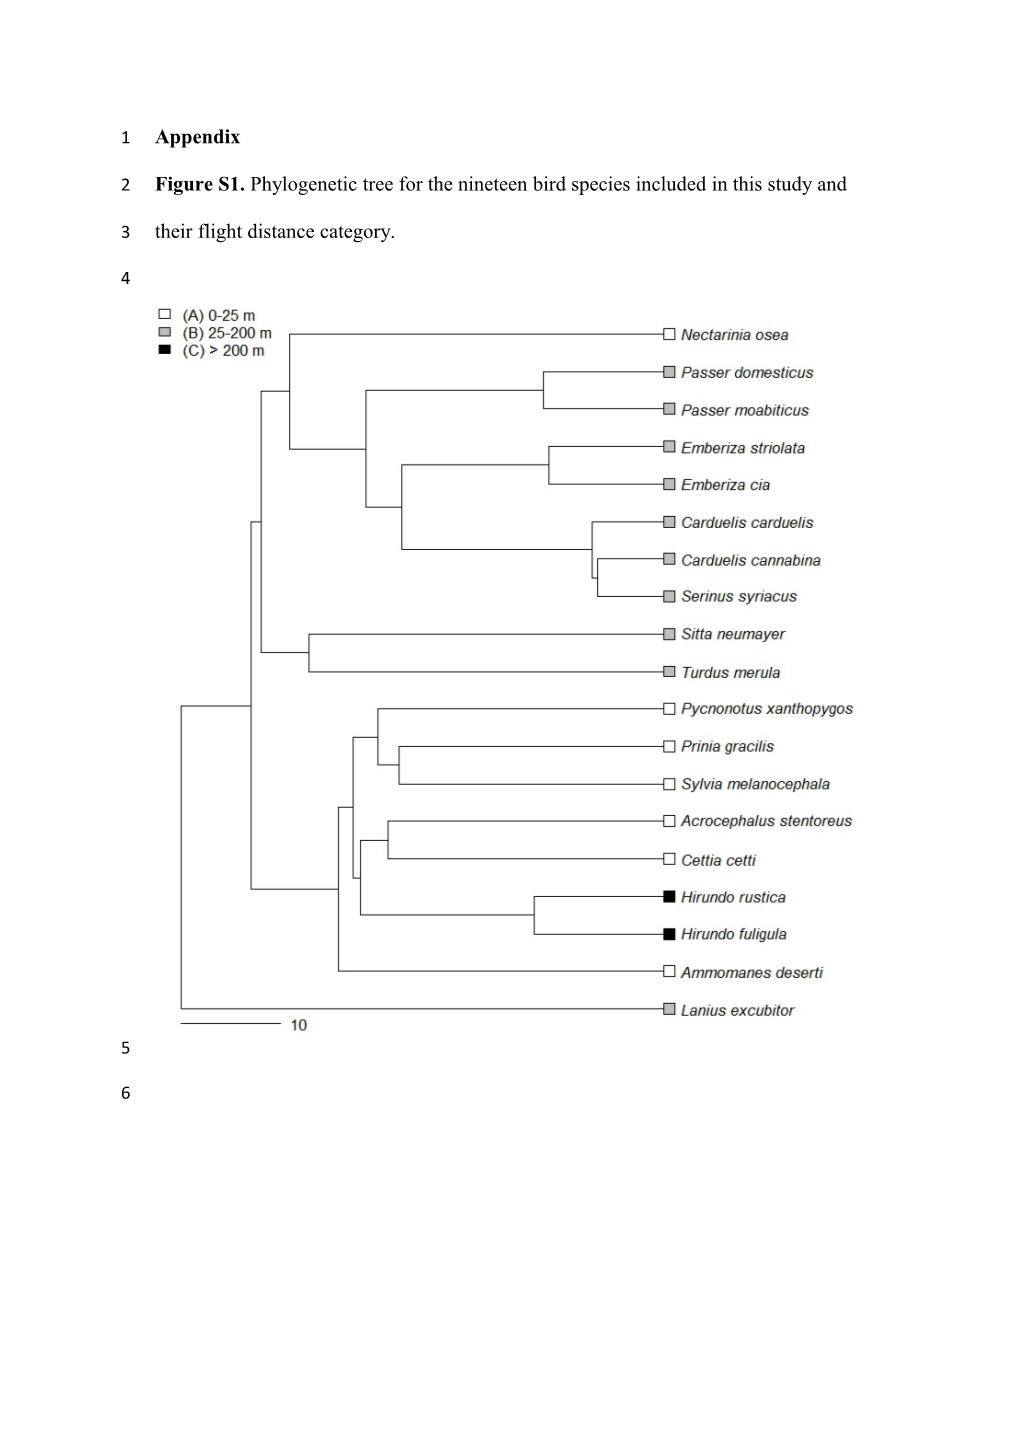 Figure S1. Phylogenetic Tree for the Nineteen Bird Species Included in This Study and Their